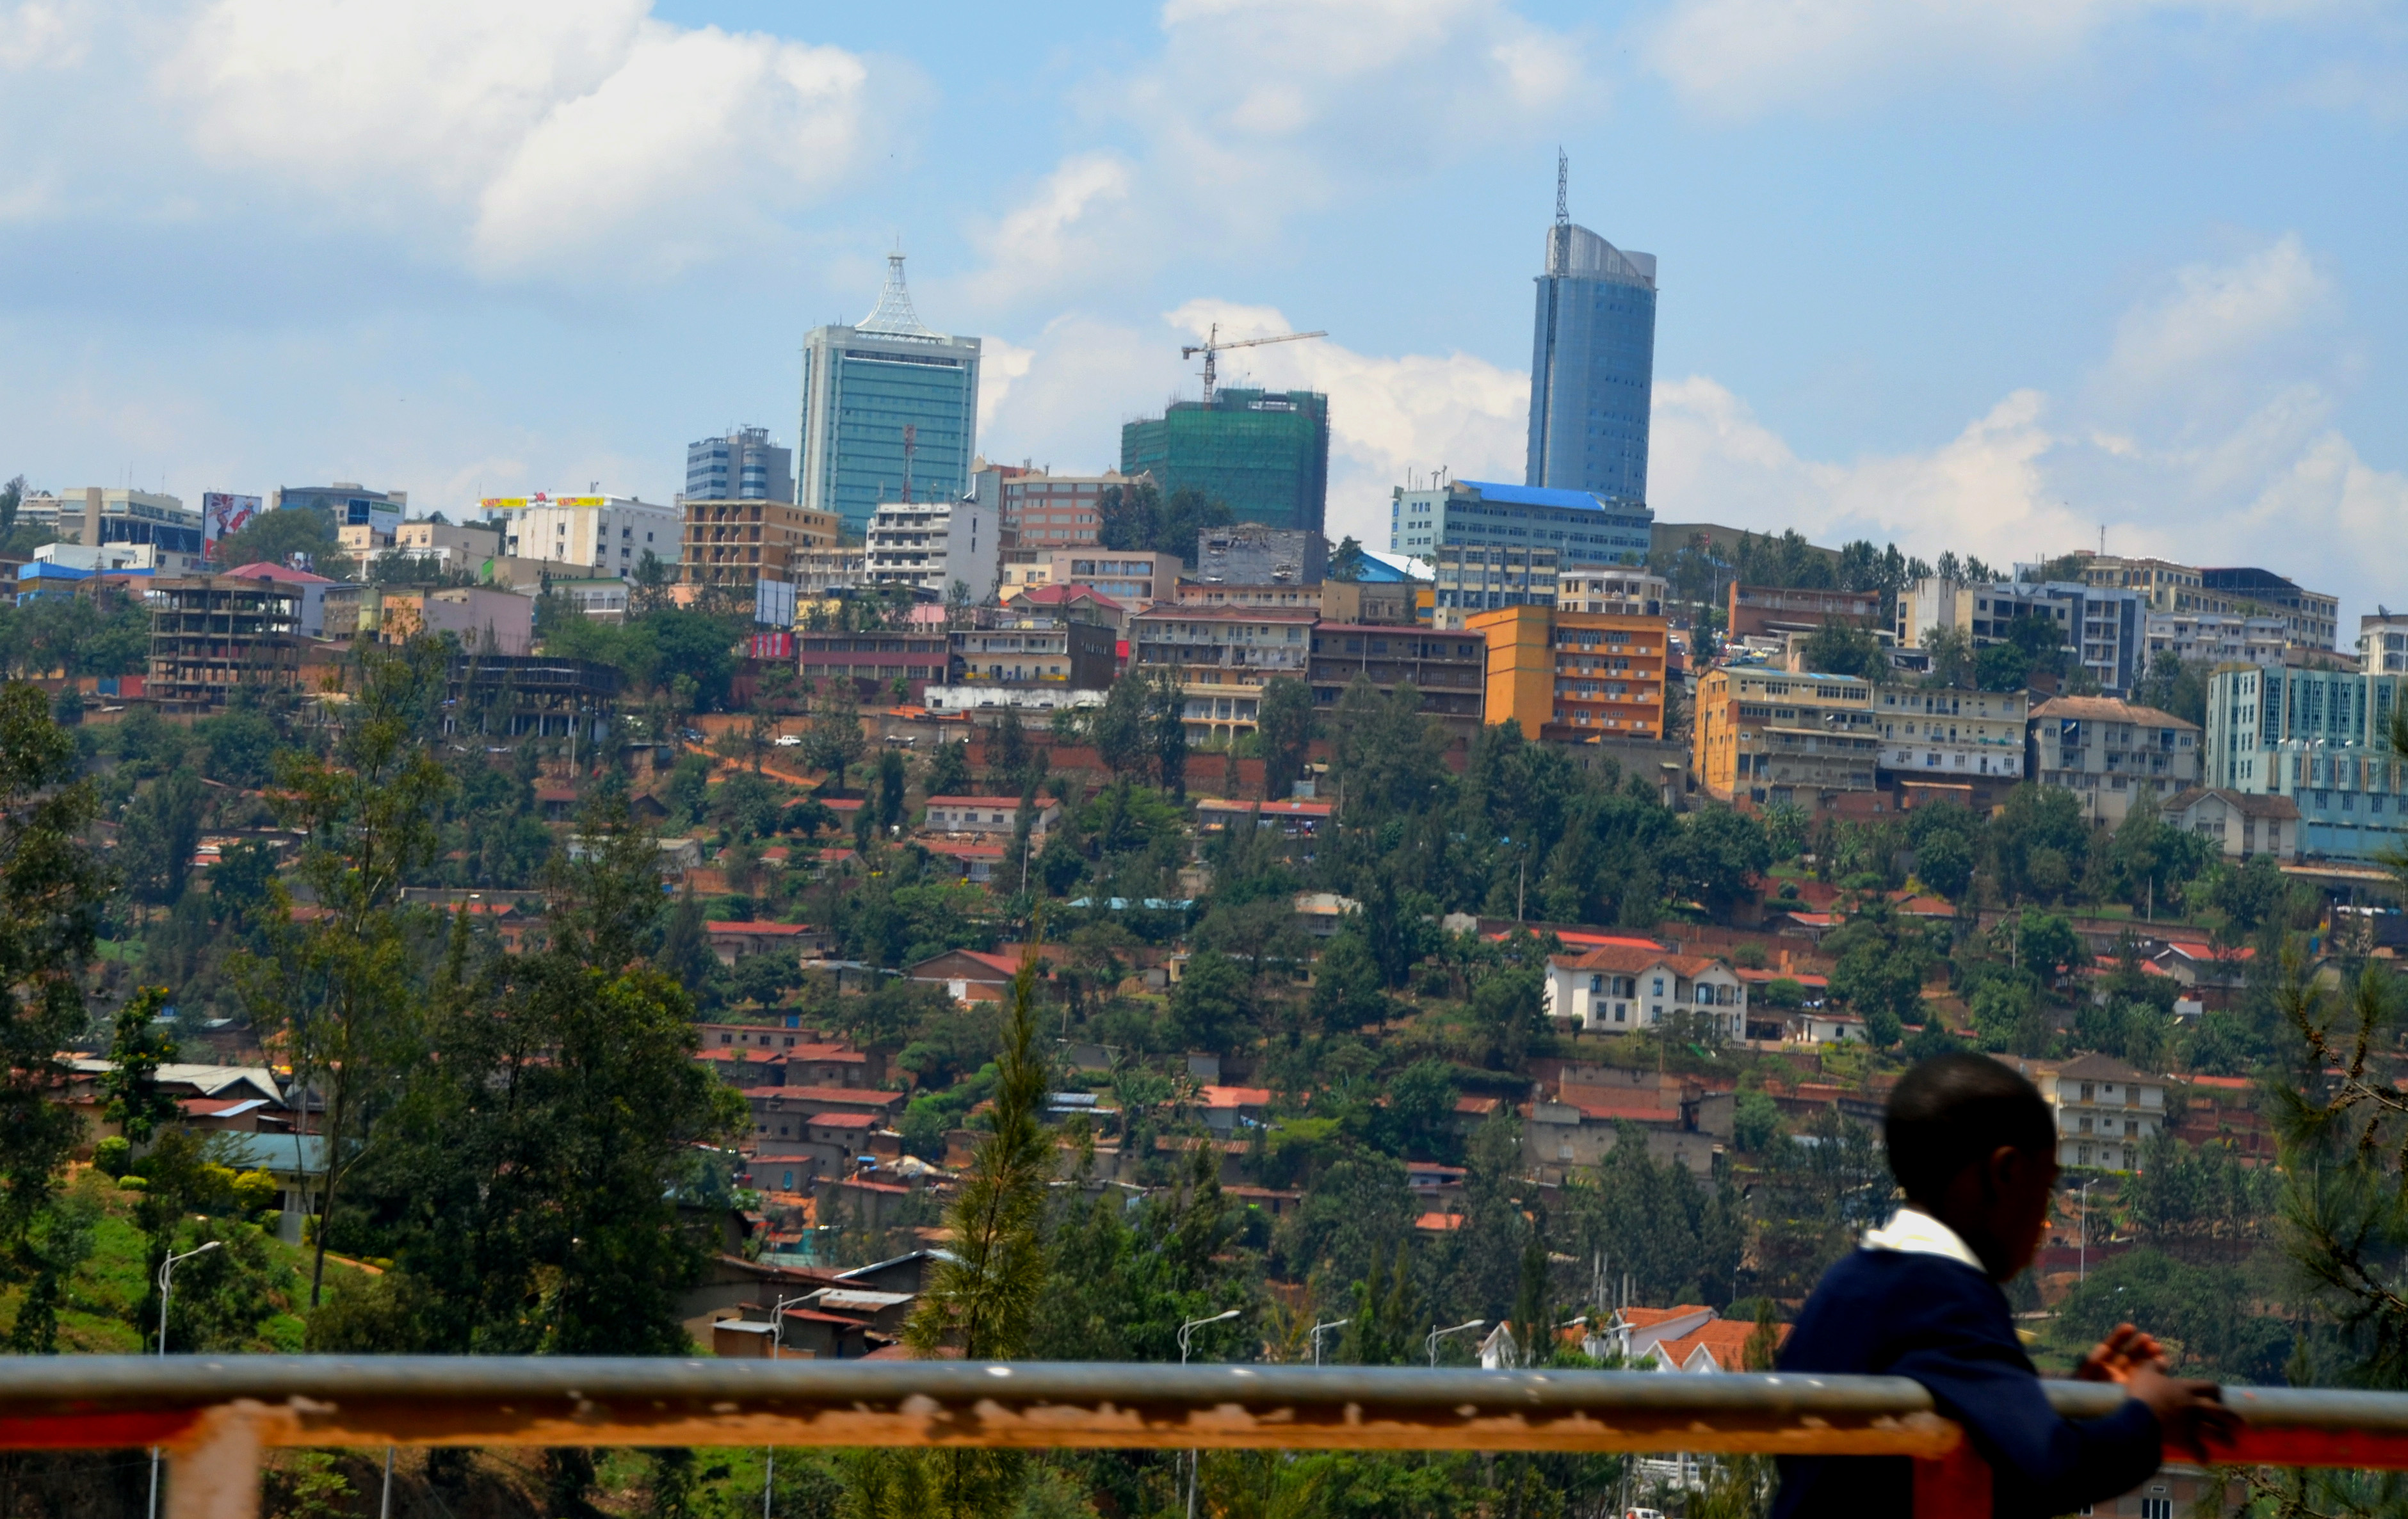 View of Kigali from the Kigali Genocide Memorial Centre